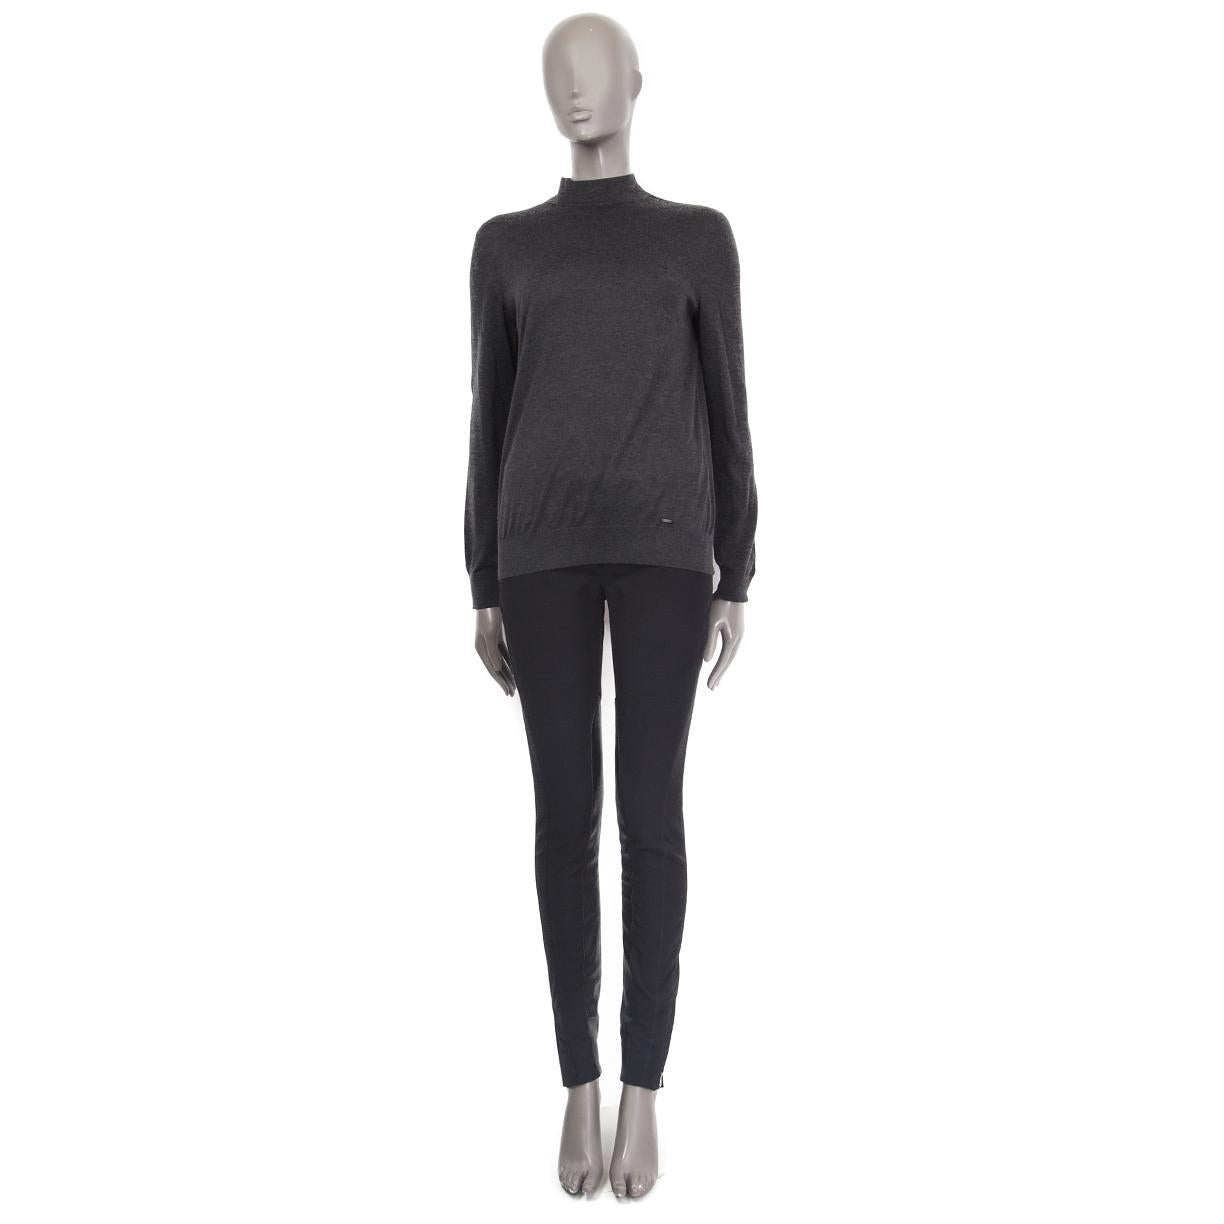 100% authentic Akris mock-neck sweater in anthracite grey cashmere (70%) and silk (30%). Has  been worn and is in excellent condition.

Measurements
Tag Size	38
Size	M
Shoulder Width	39cm (15.2in)
Bust	100cm (39in) to 108cm (42.1in)
Waist	96cm